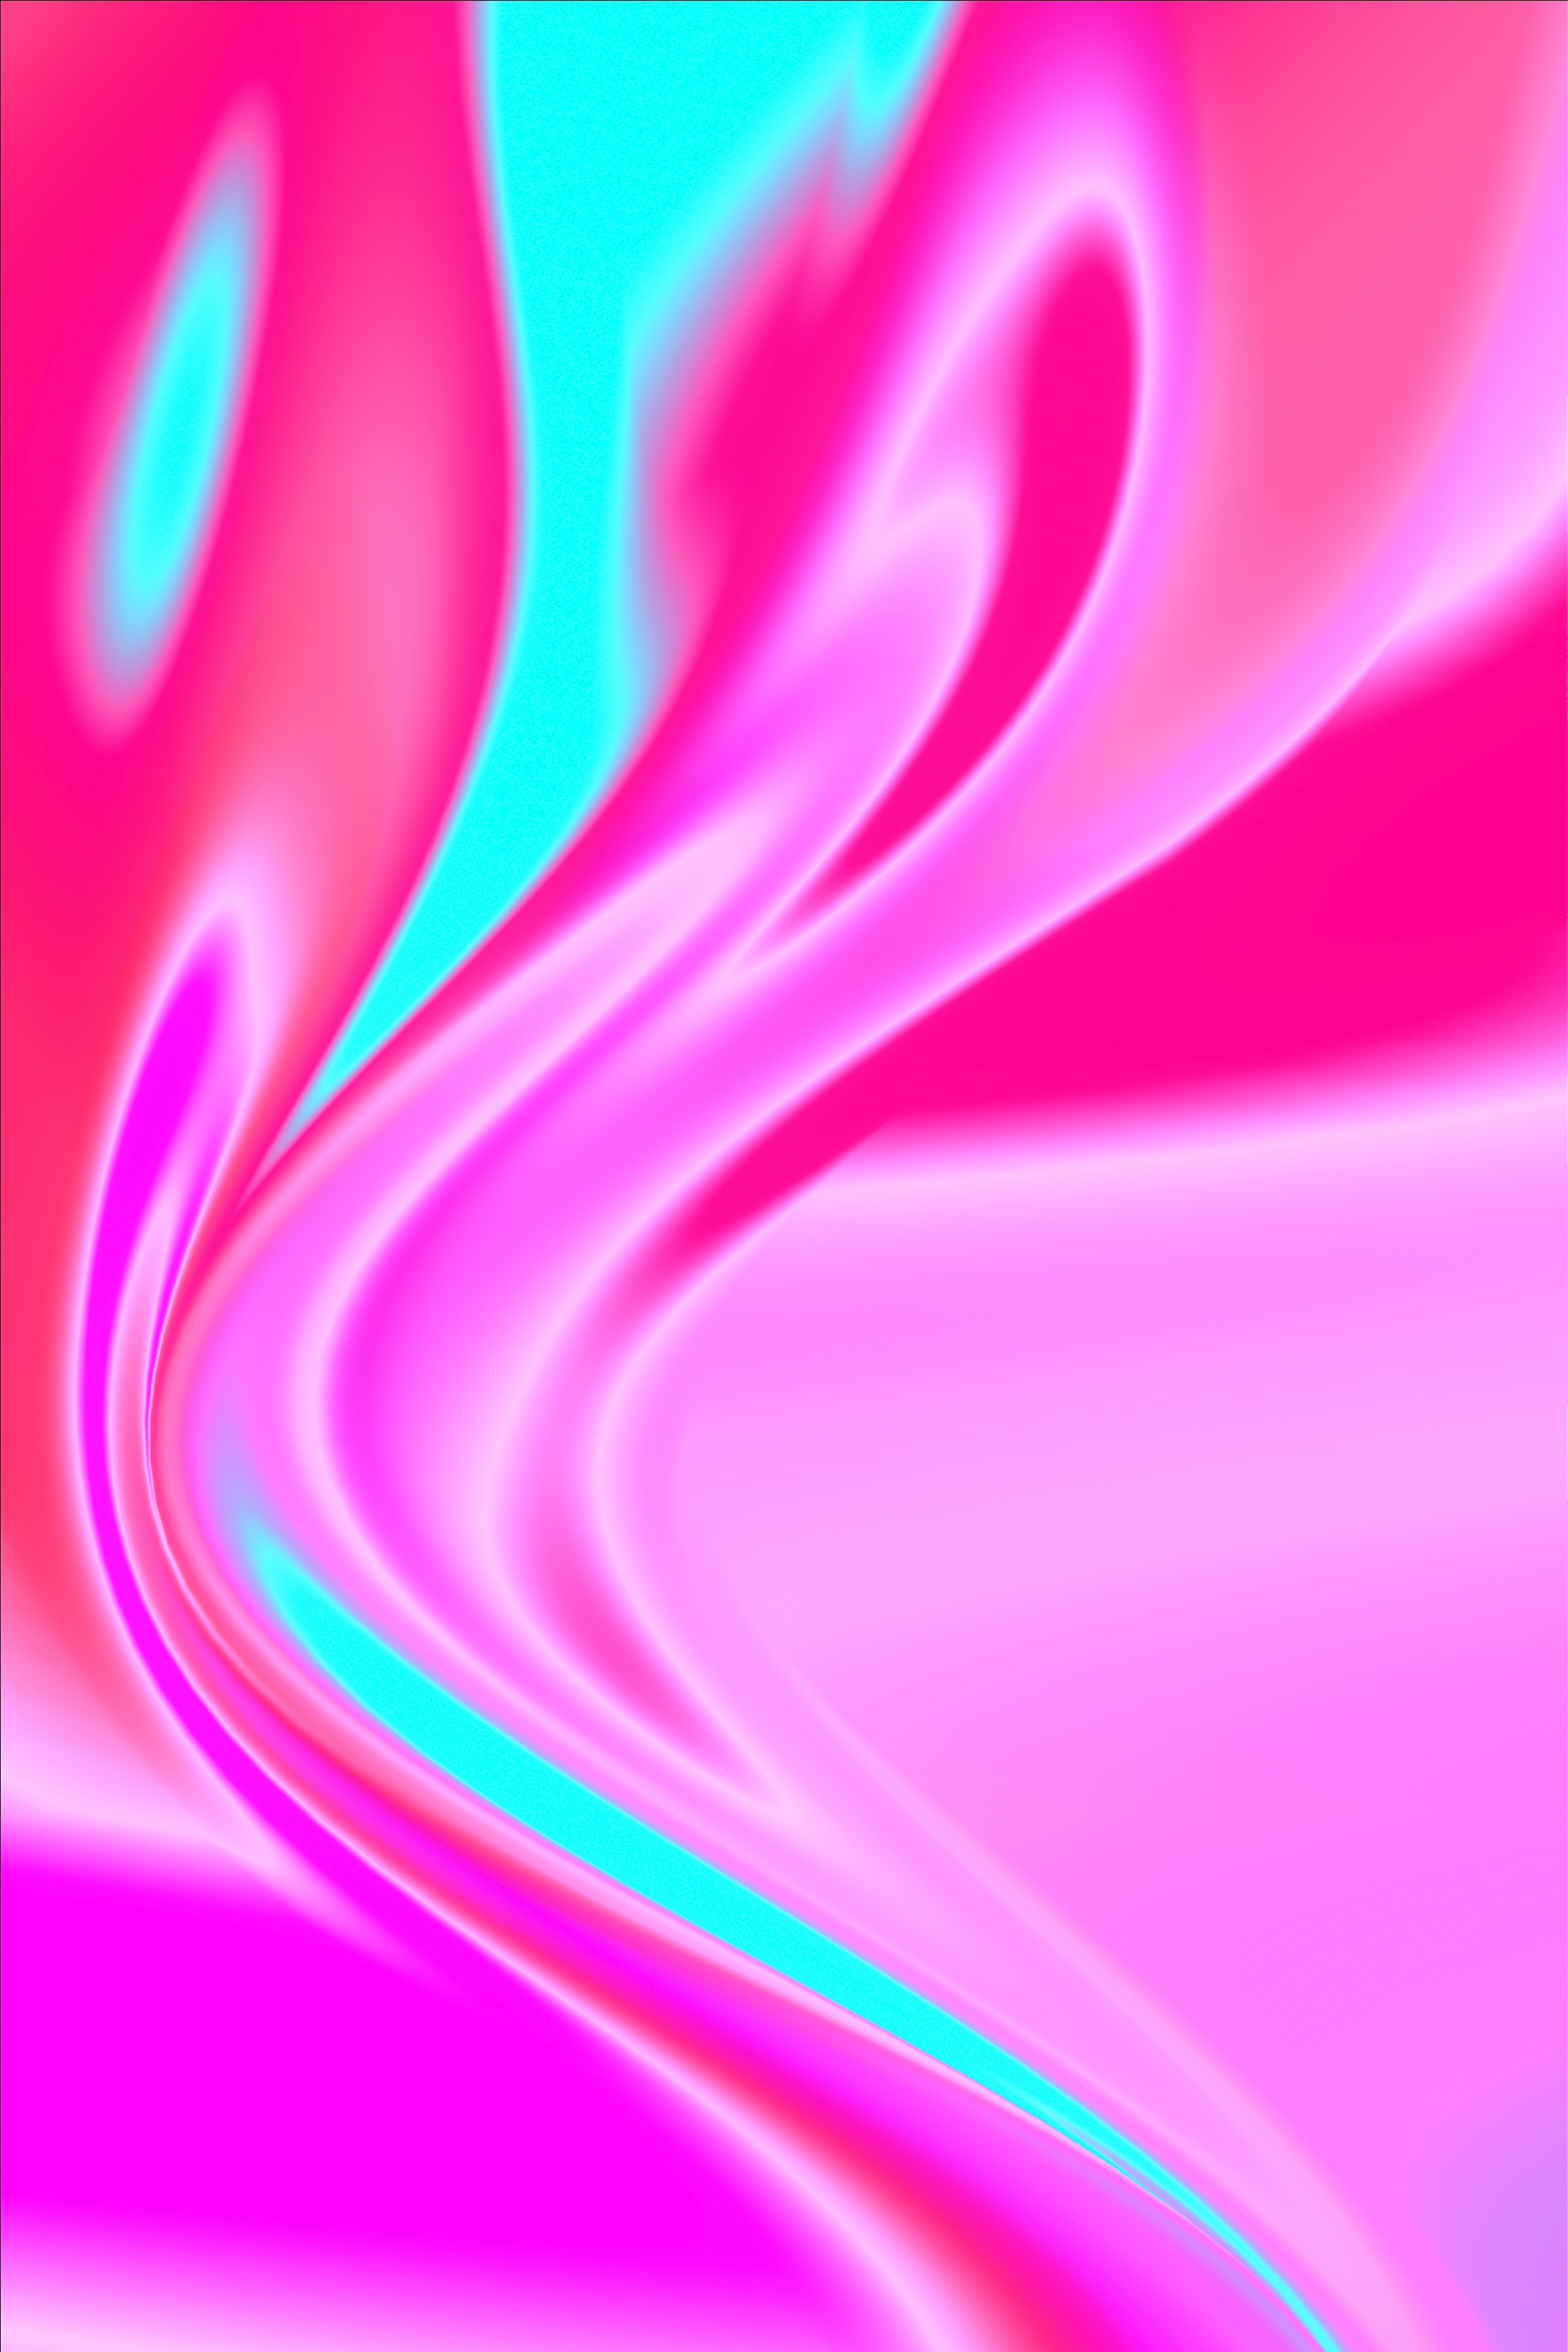 Relief mixing, wavy, abstract, pink 8k Backgrounds